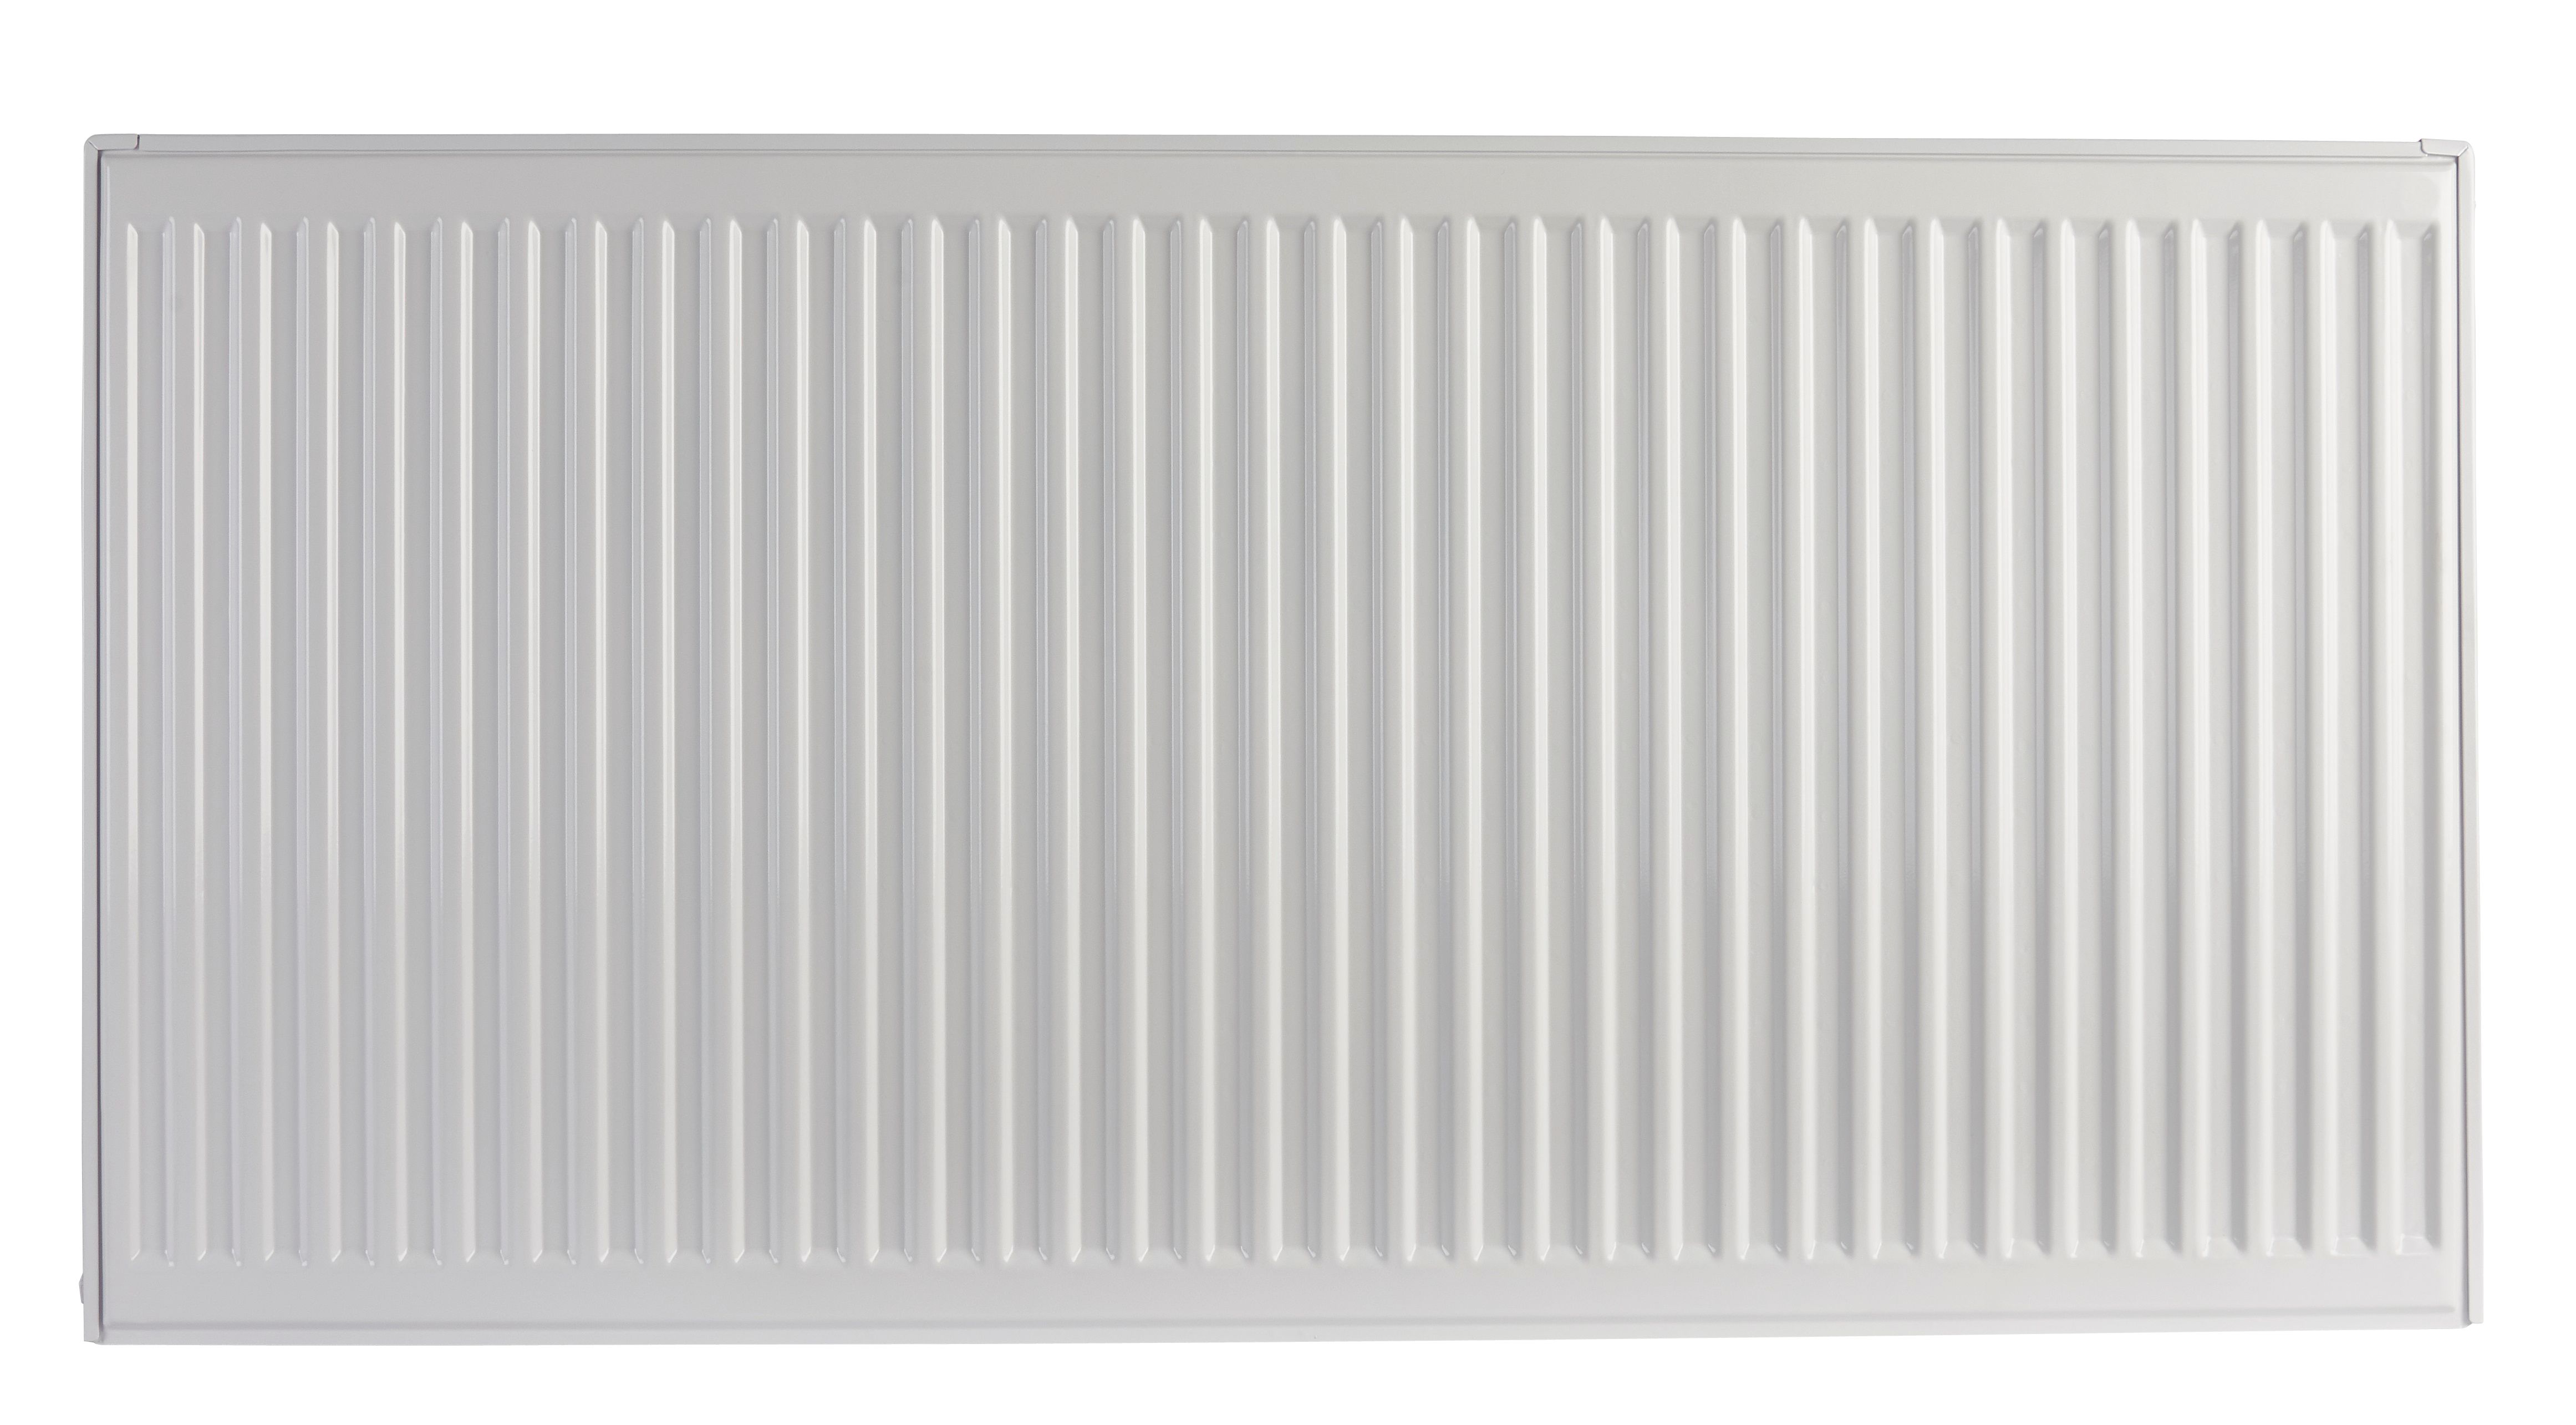 Image of Homeline by Stelrad 500 x 600mm Type 11 Single Panel Single Convector Radiator